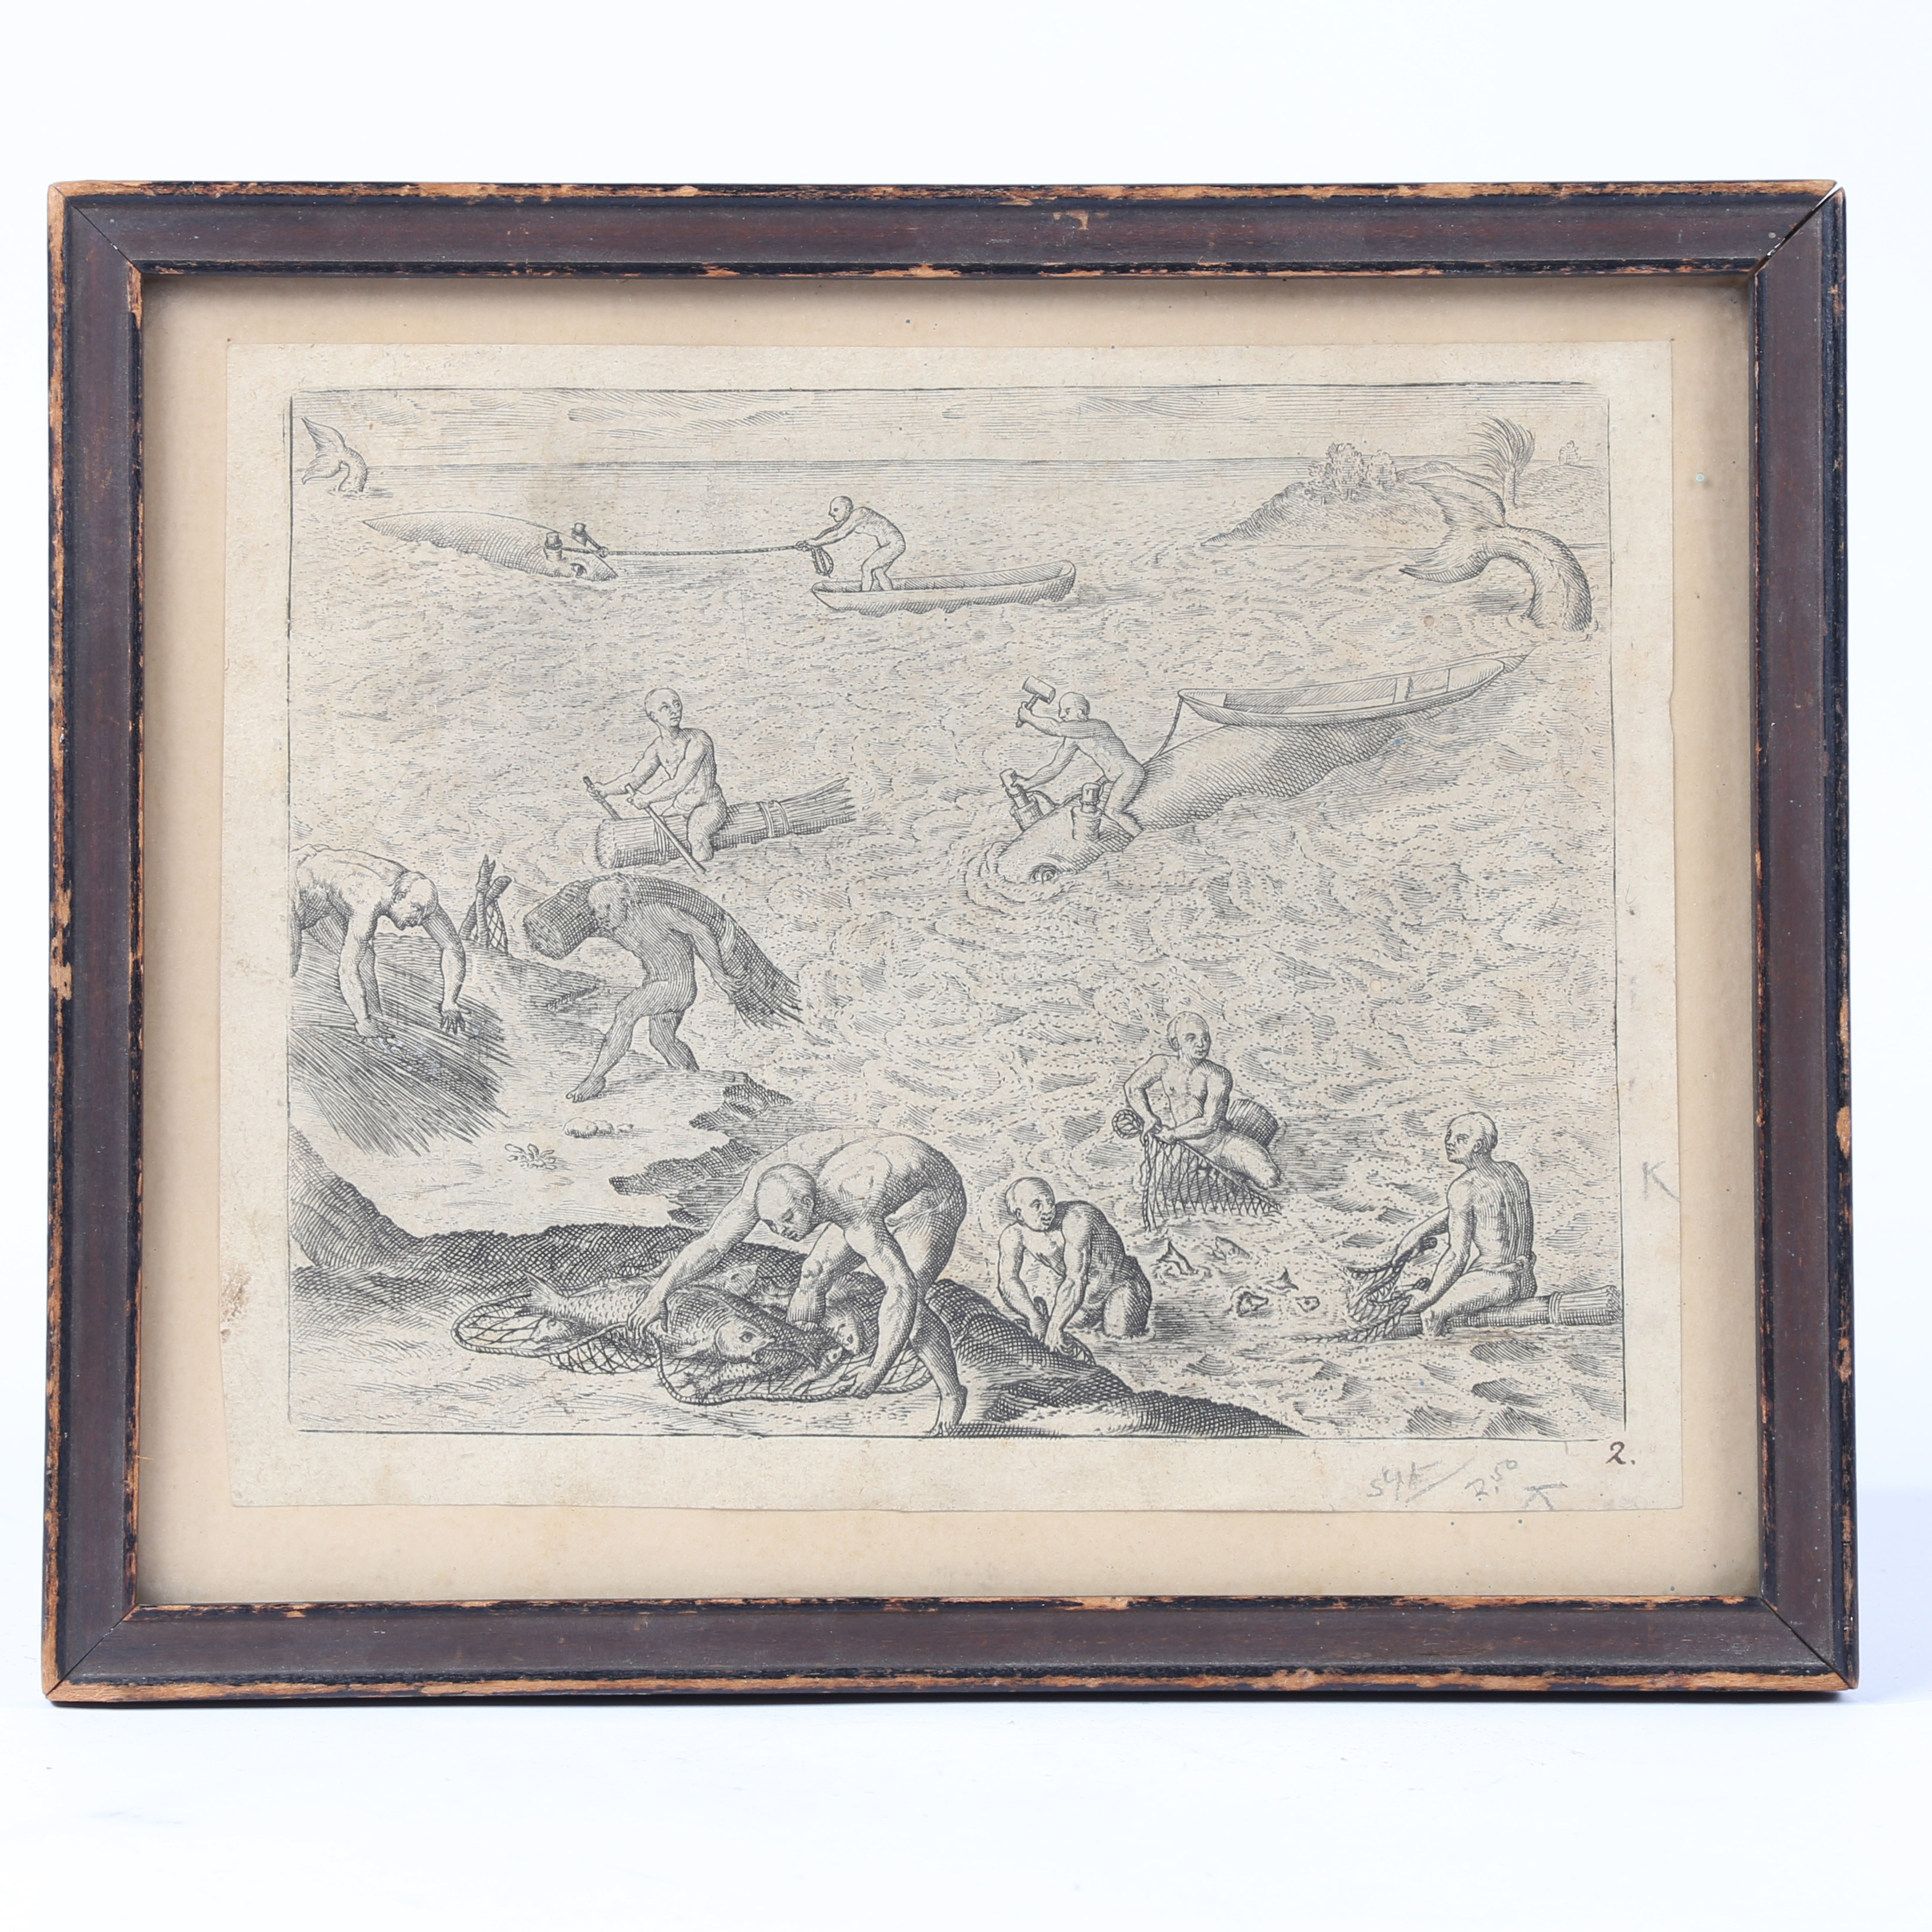 RARE 16TH CENTURY WHALE HUNTING ENGRAVING, BY THEODORE DE BRY, HARPOONING WHALES, CIRCA 1590.